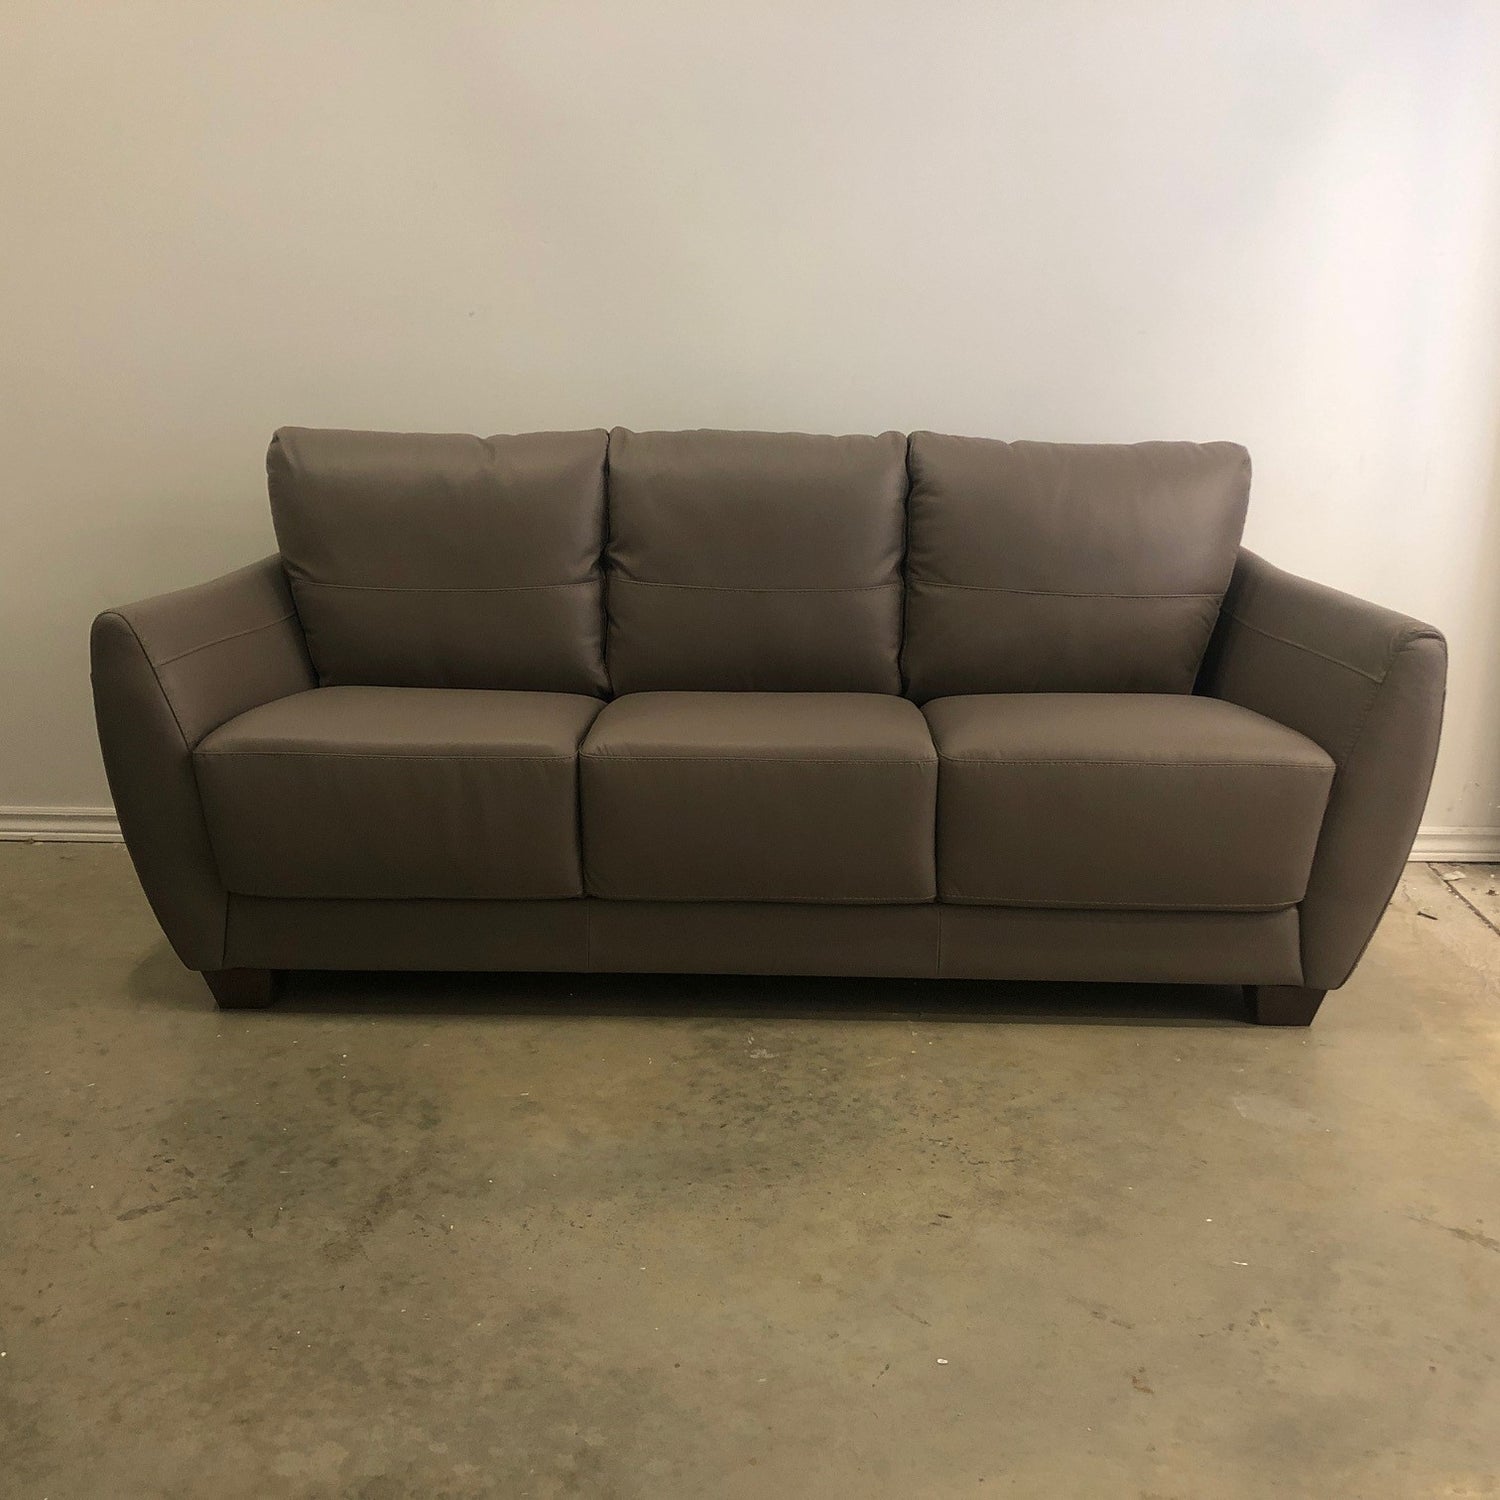 DYLAN LEATHER SOFA